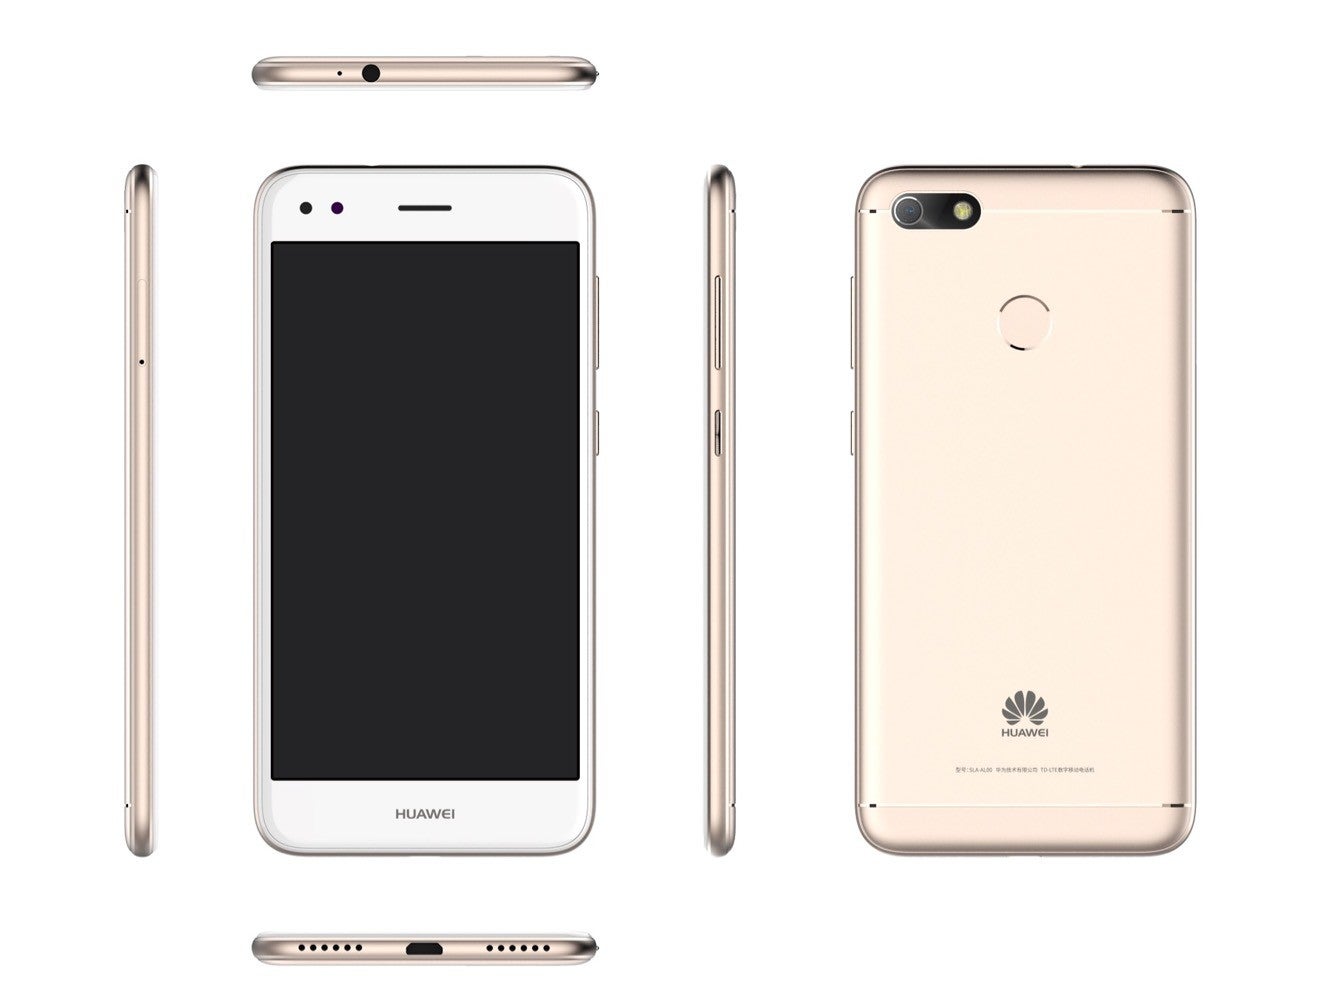 Dual-SIM Huawei P9 lite mini quietly launched in Europe for €190